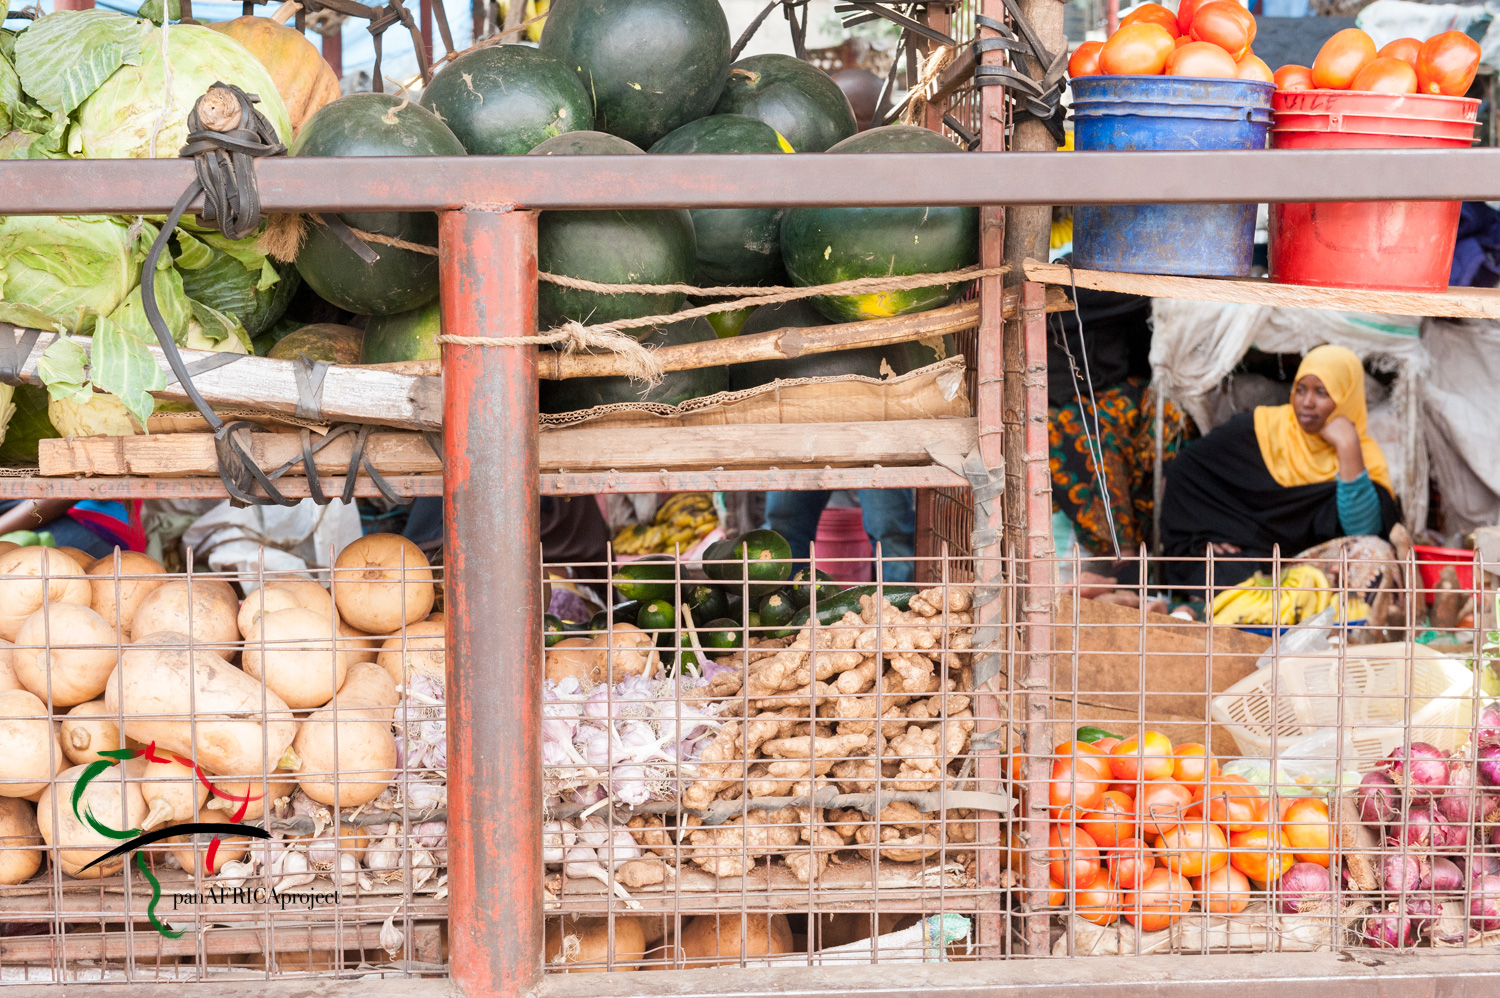 A woman selling vegetables